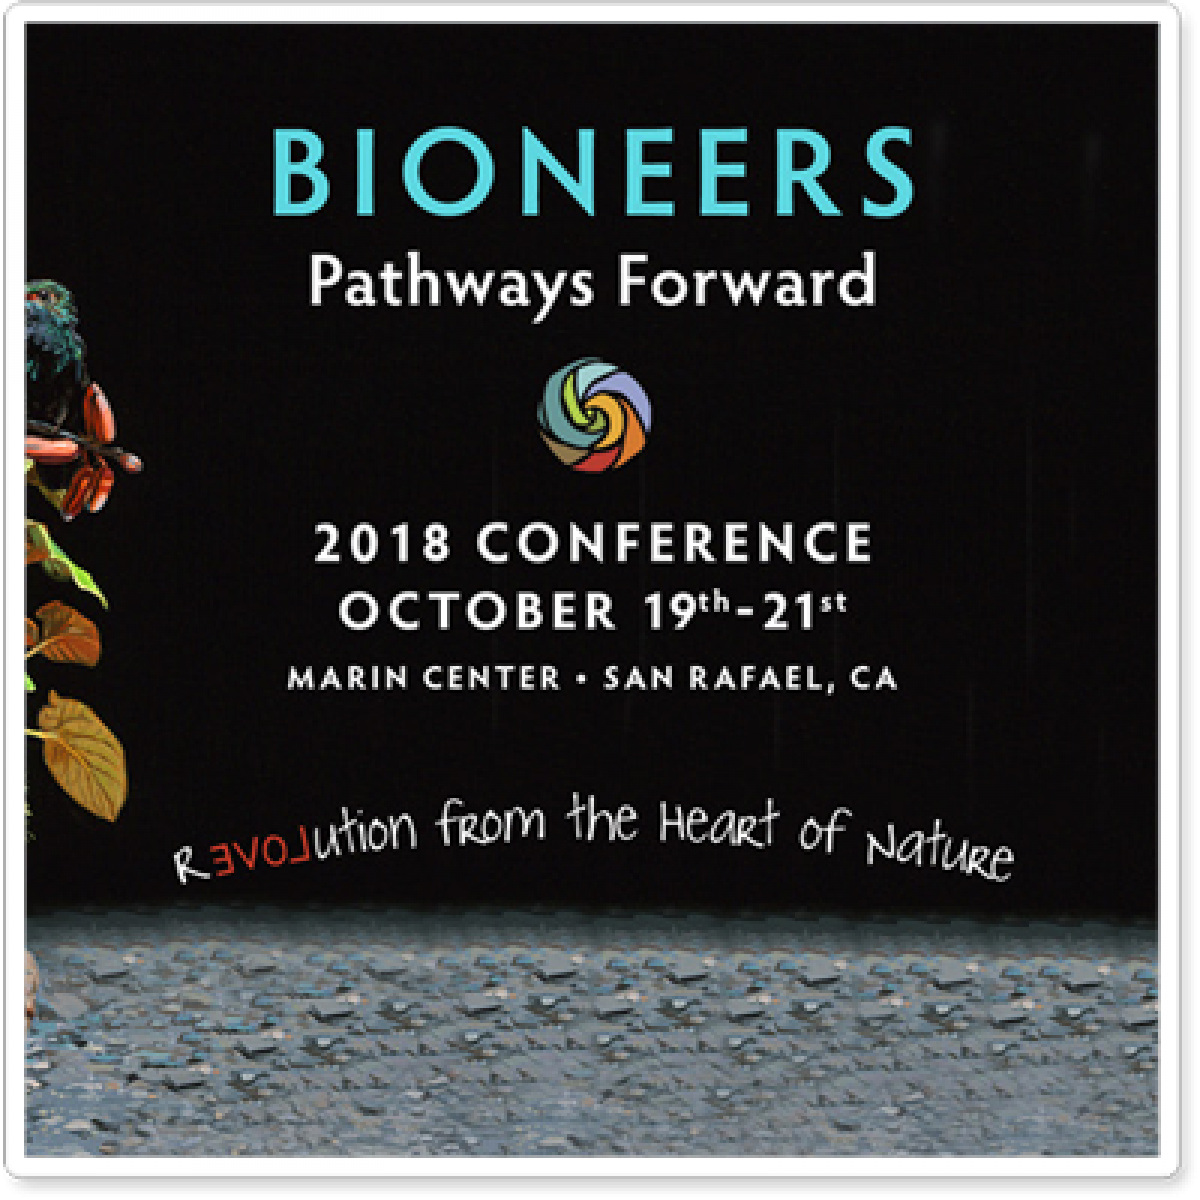 bioneers conference 2018